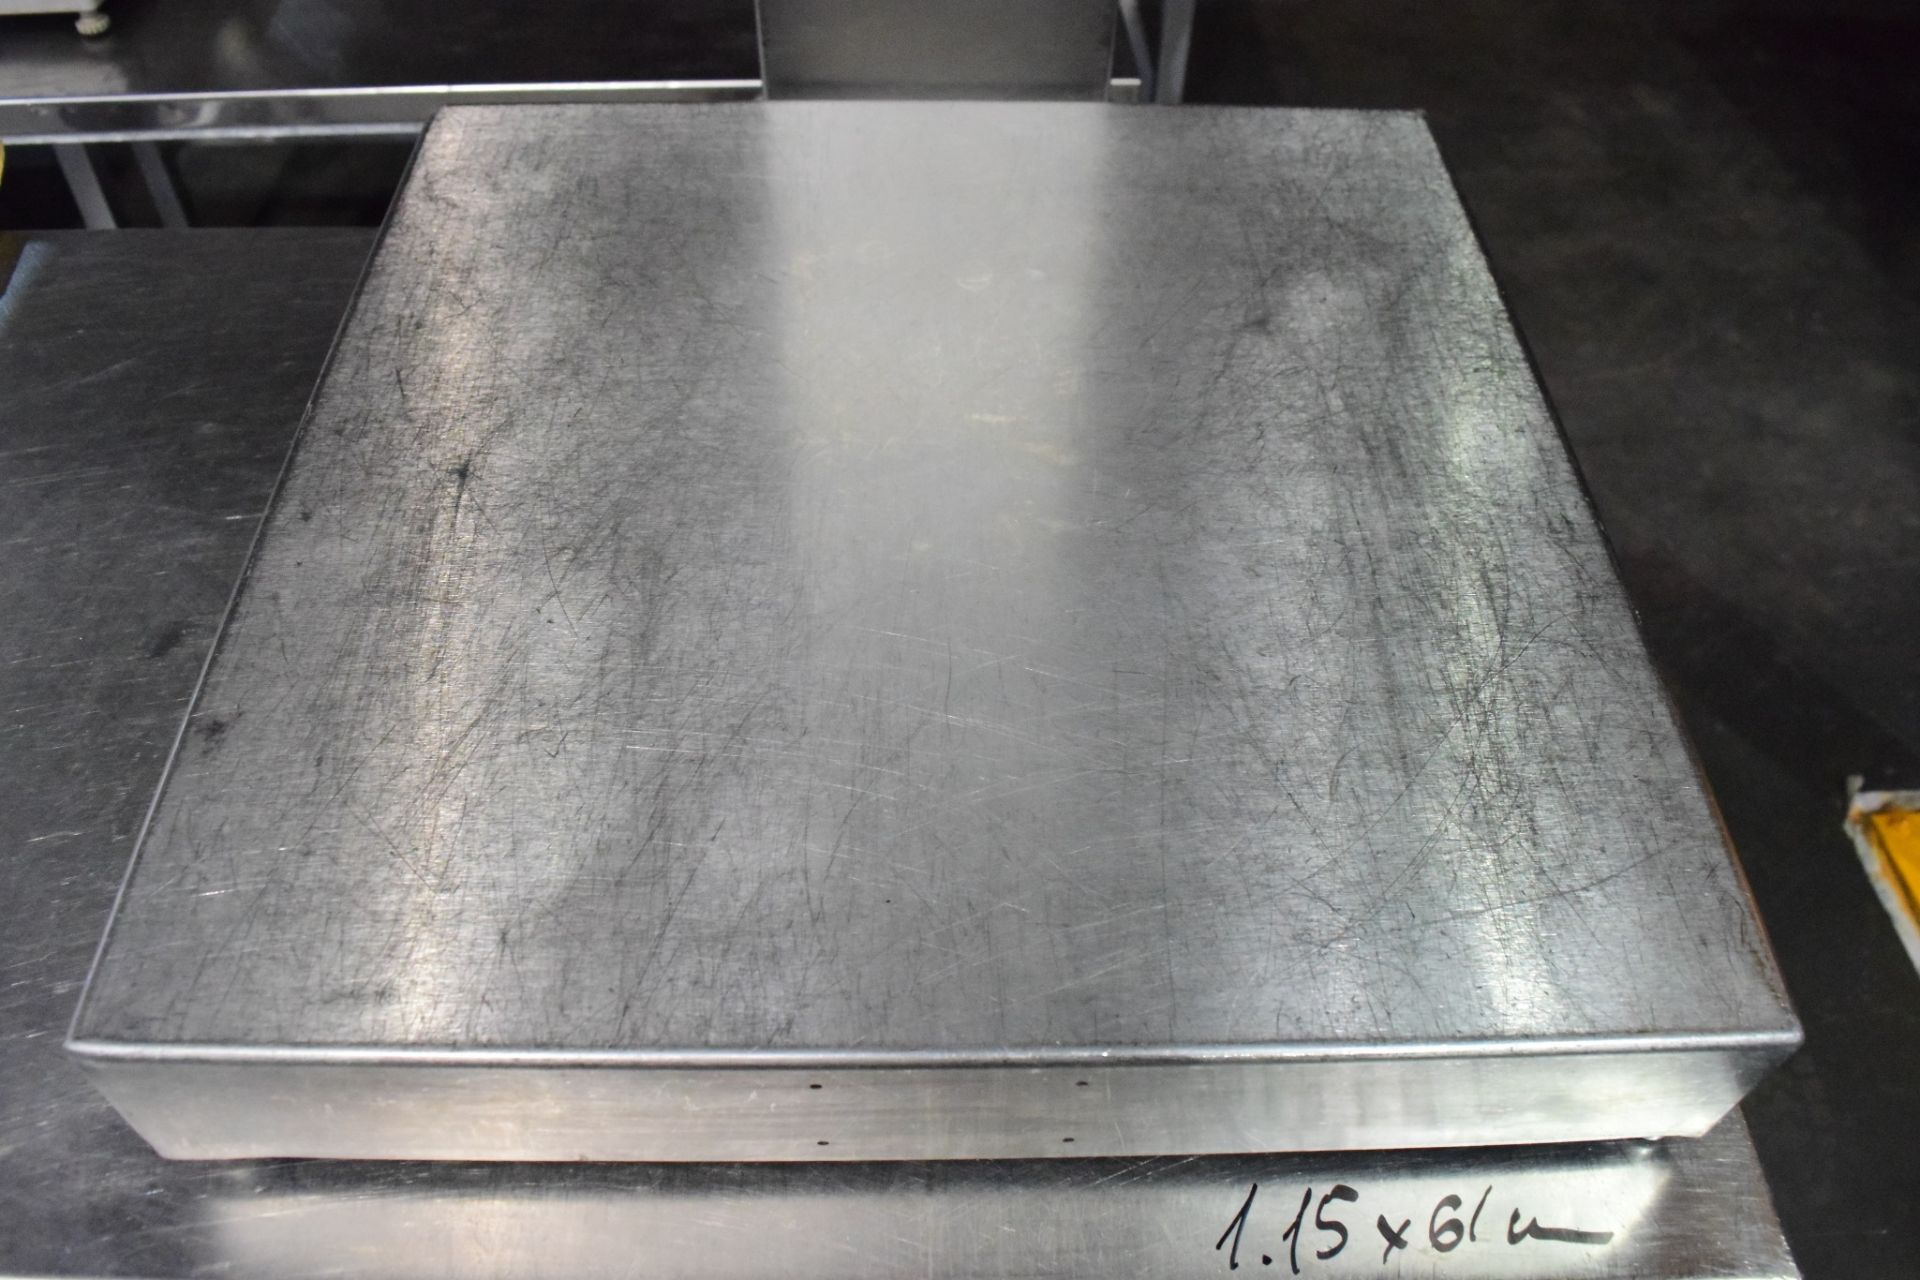 Avery Weigh Tronix scale, stainless steel, platform size: 500 x 500, overall dimensions: 1000 H x